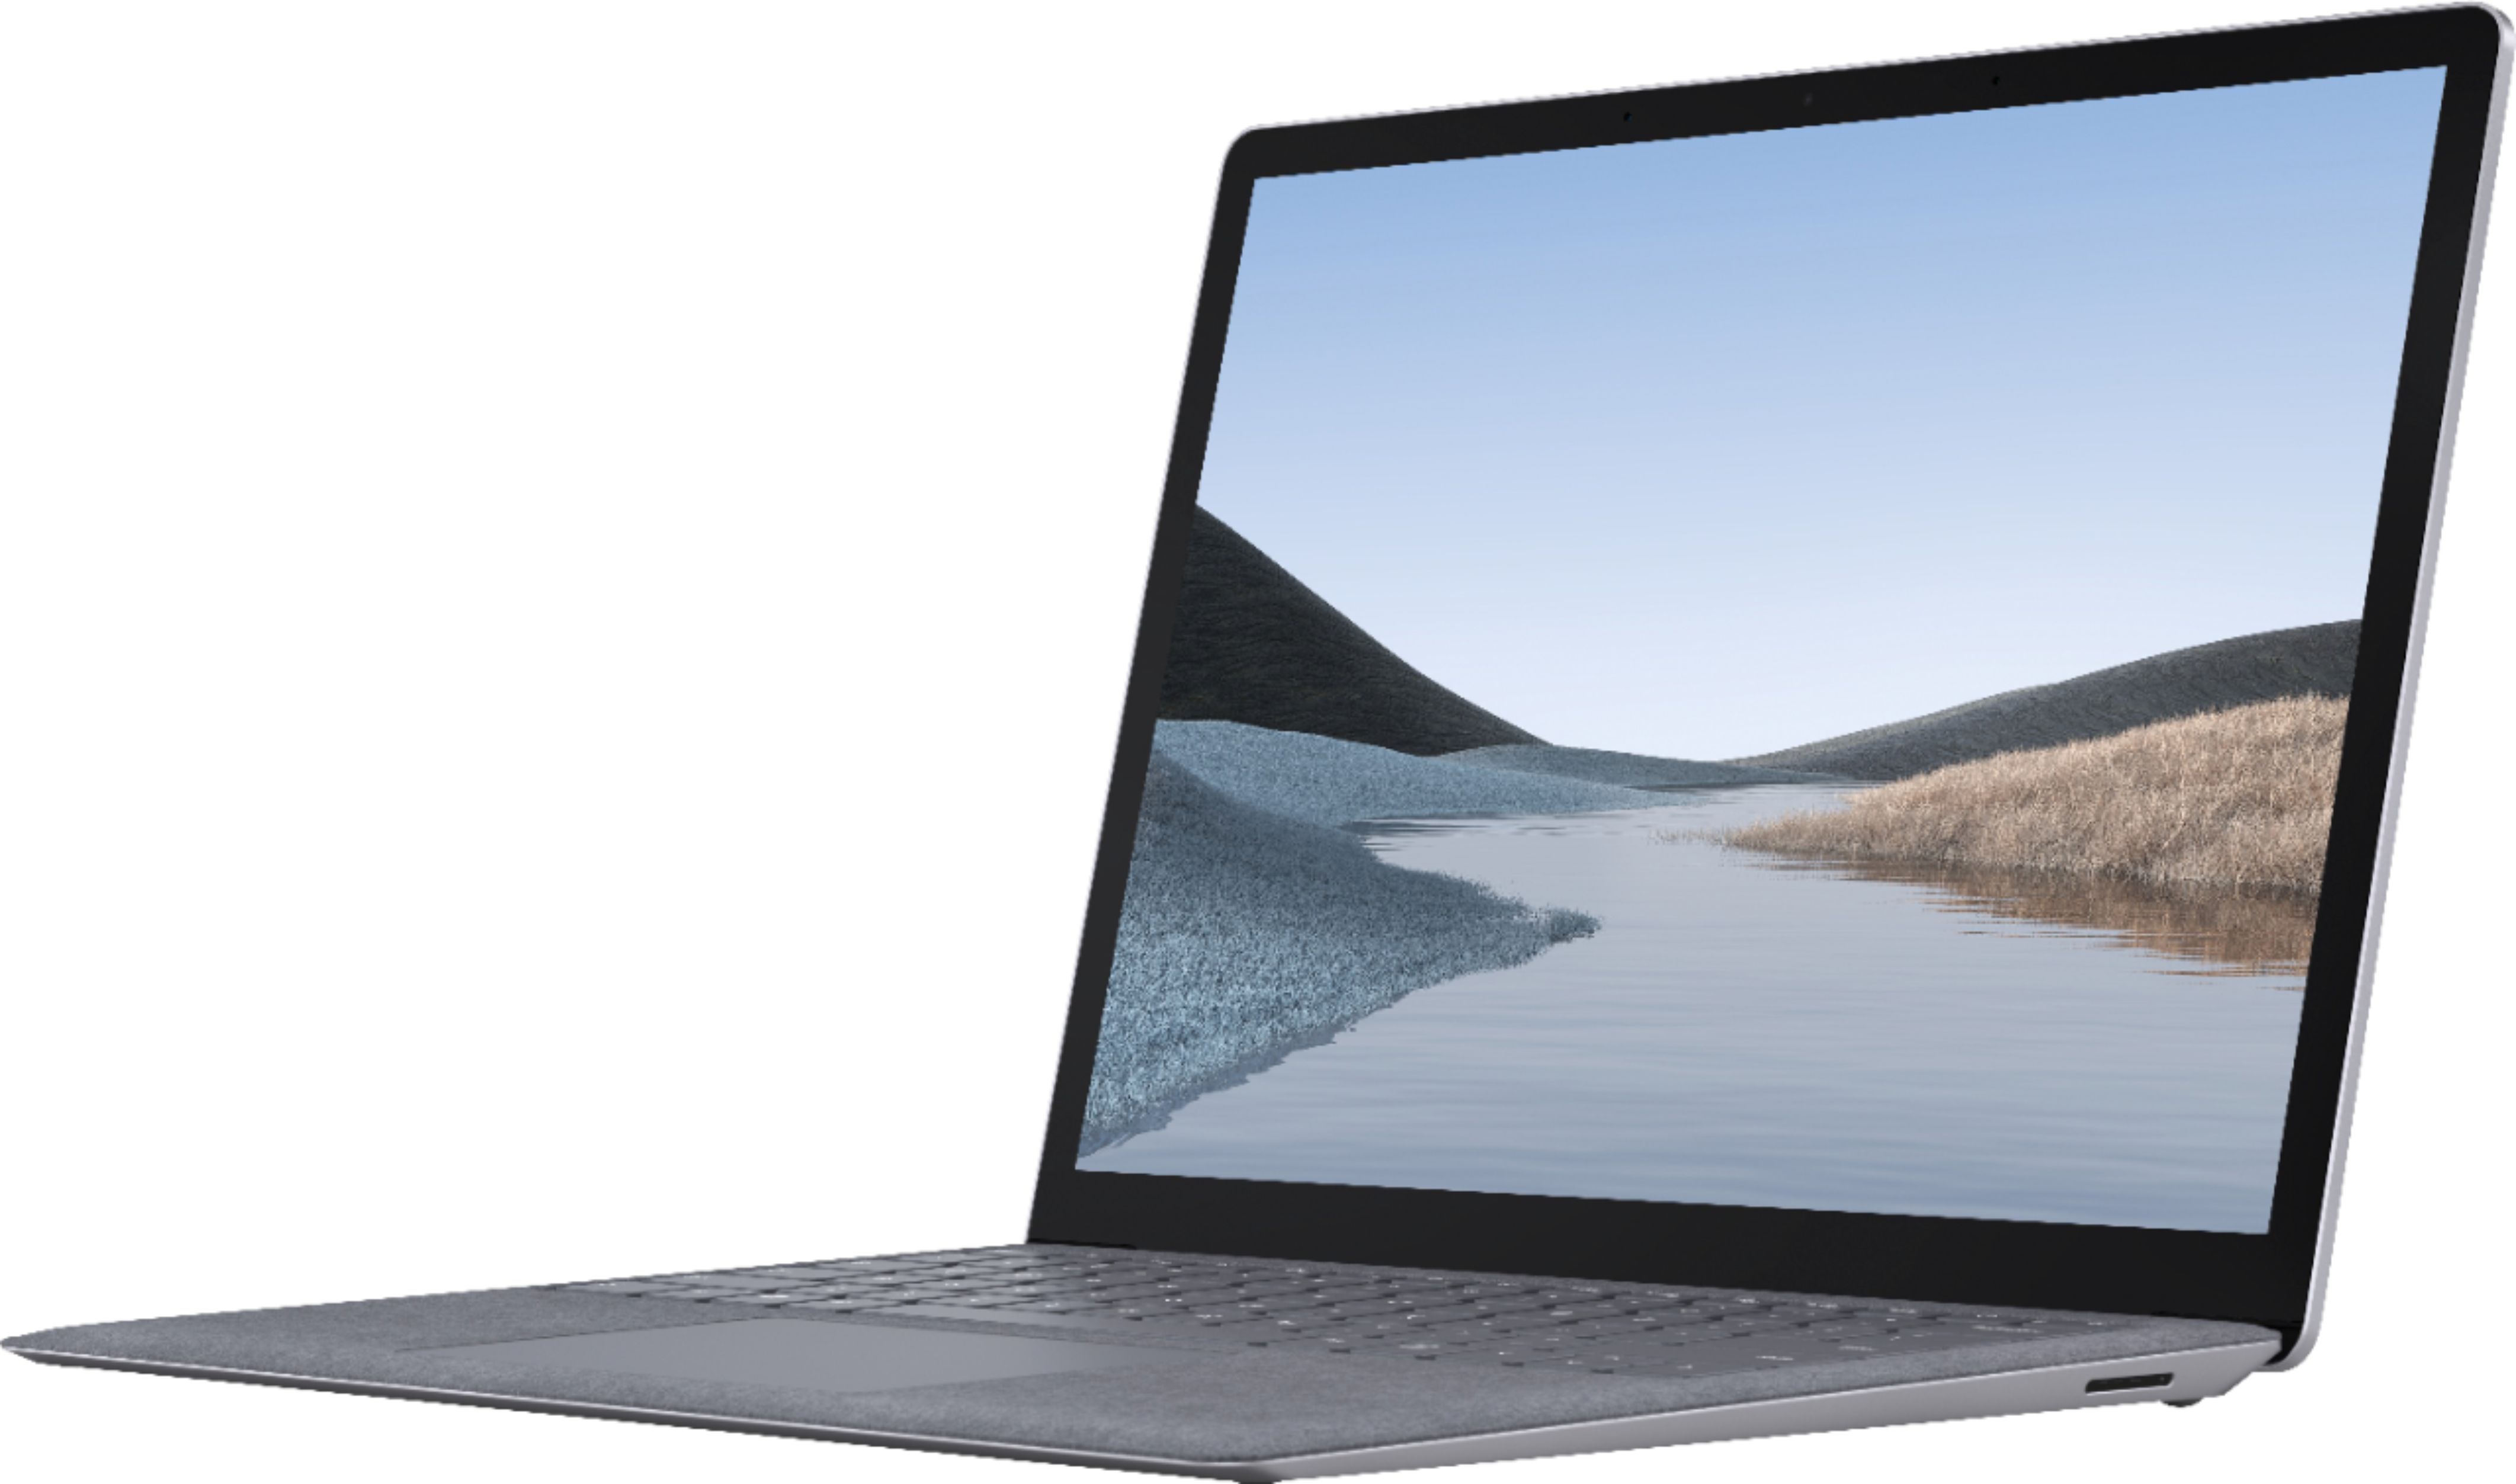 Microsoft - Surface Laptop 3 - 13.5" Touch-Screen - Intel Core i5 - 8GB